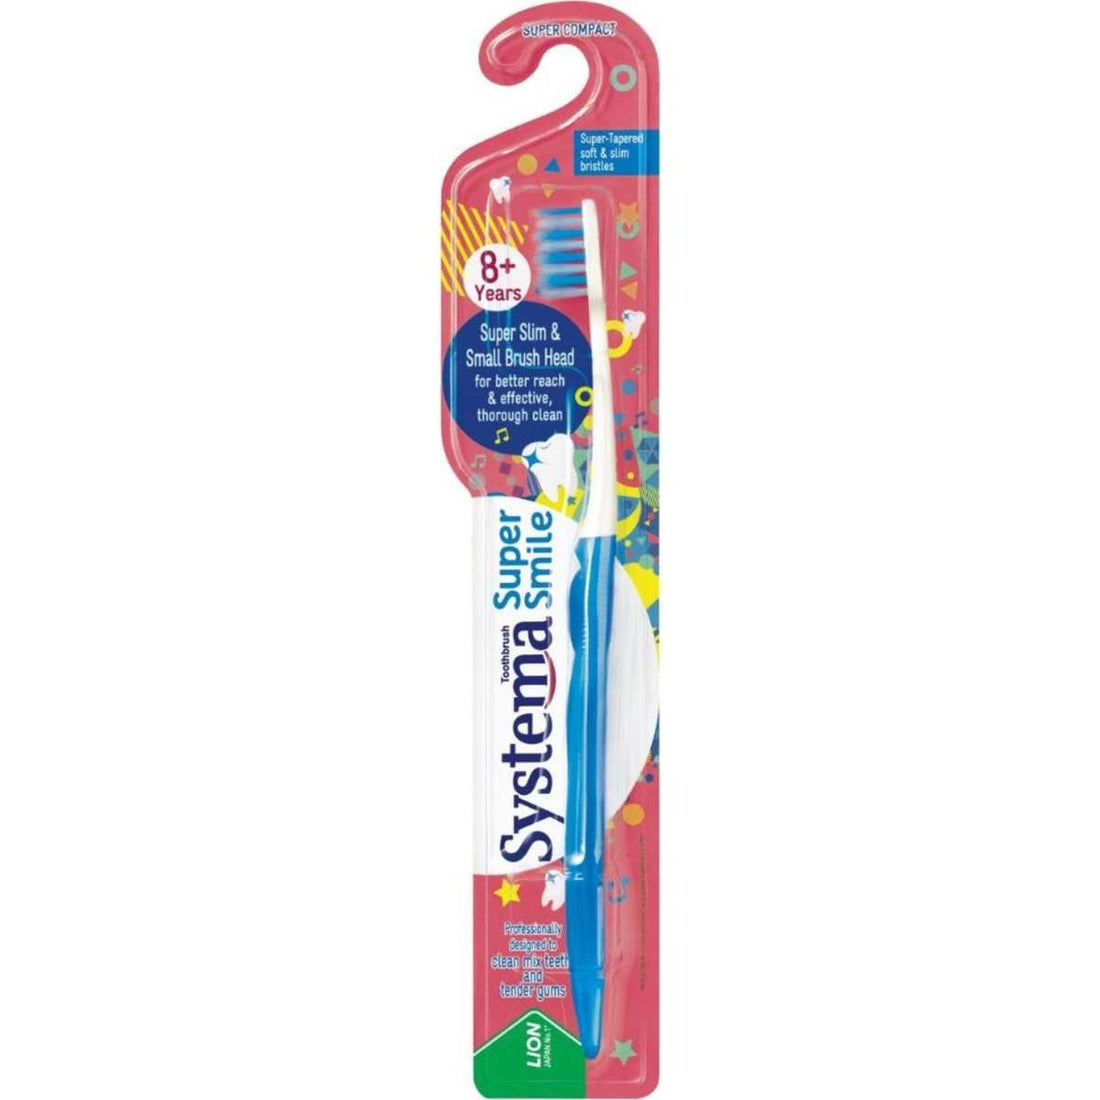 Systema Super Smile 8+ years Super Compact Head 4 Pack